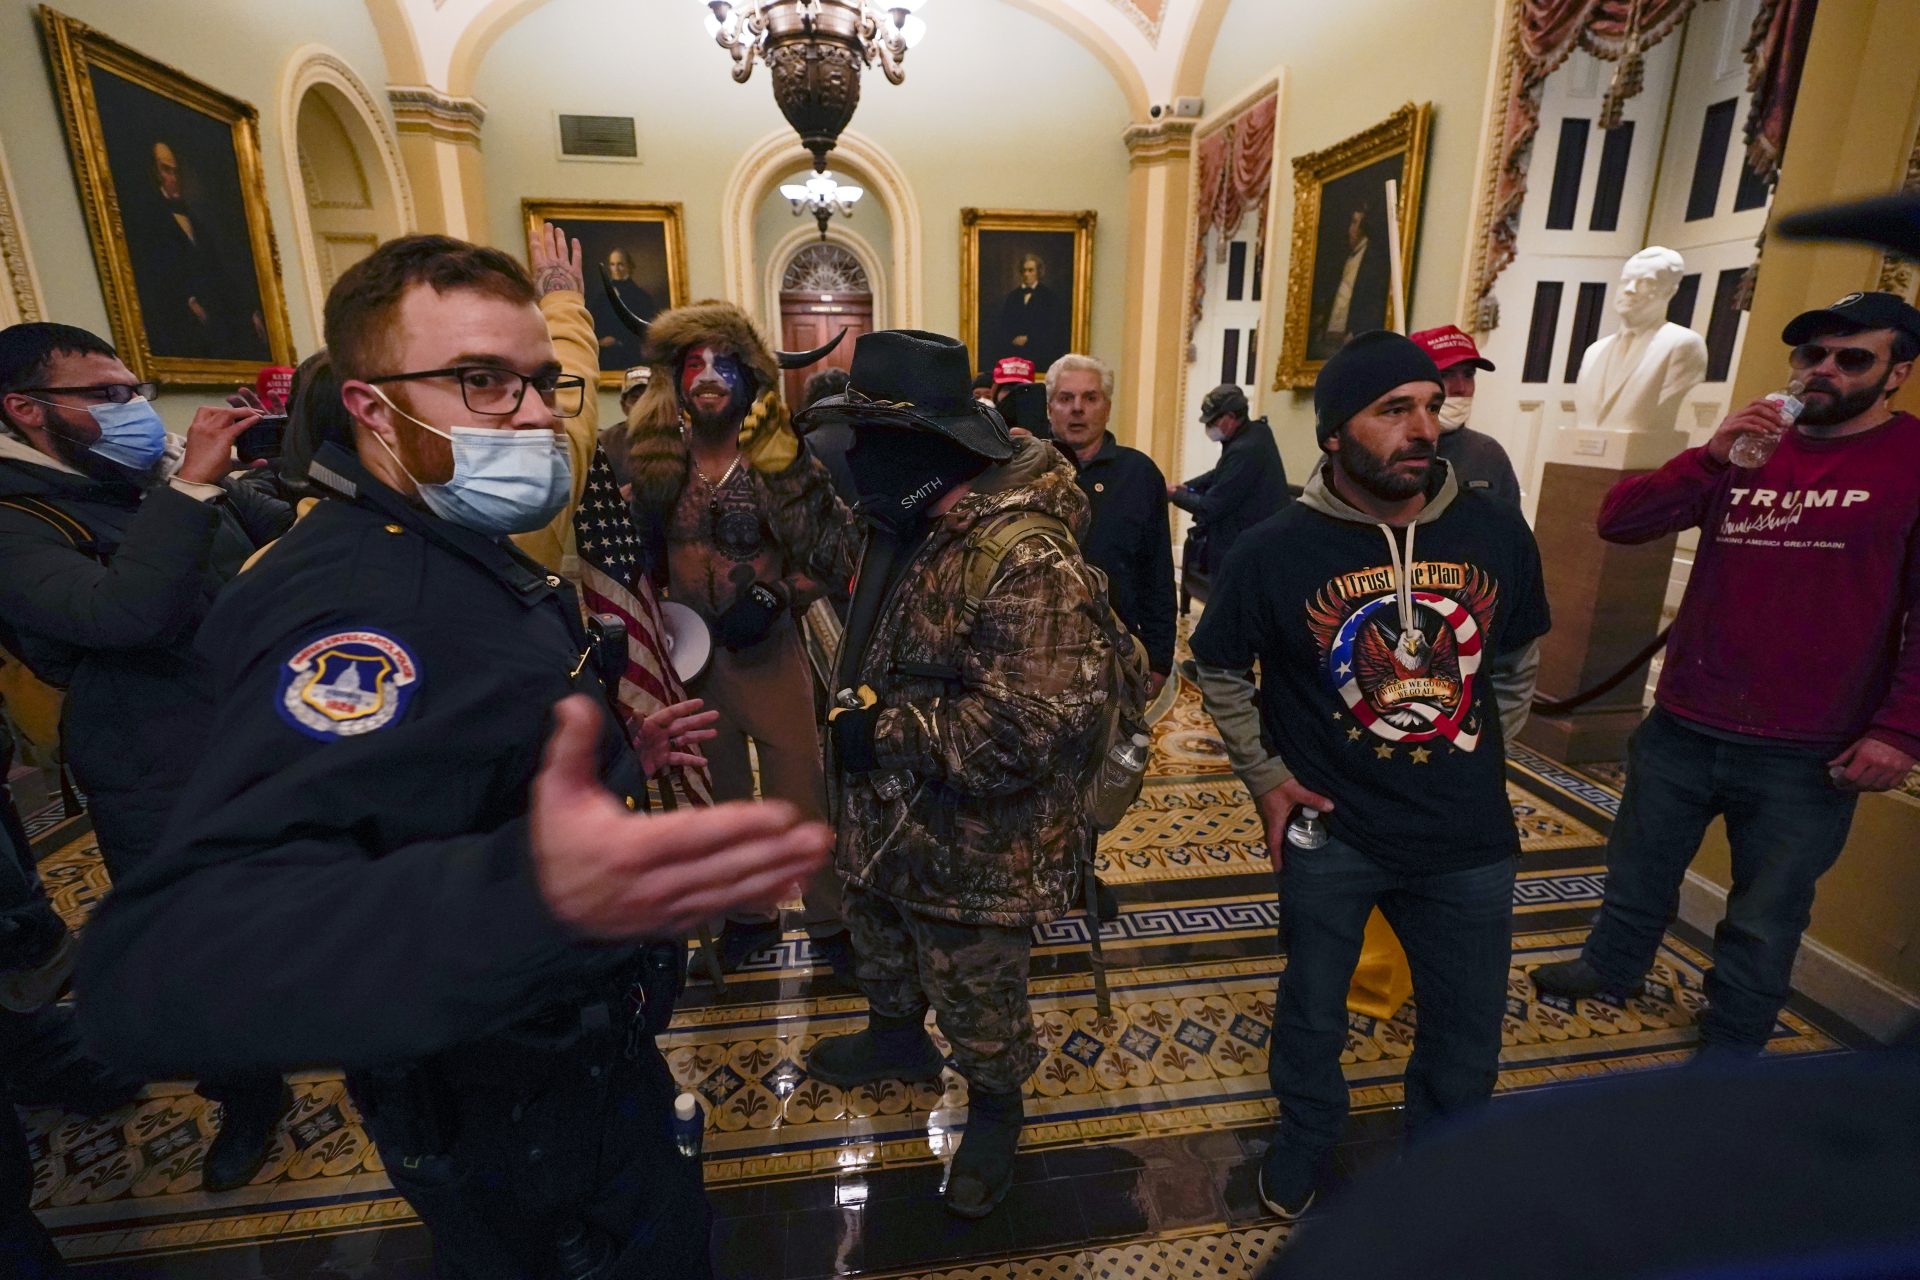 Rioters walk as U.S. Capitol Police officers watch in a hallway near the Senate chamber at the Capitol in Washington, Wednesday, Jan. 6, 2021. A court filing against Jacob Chansley, seen here wearing face paint and fur, states the mob wanted to "capture and assassinate elected officials in the United States Government."